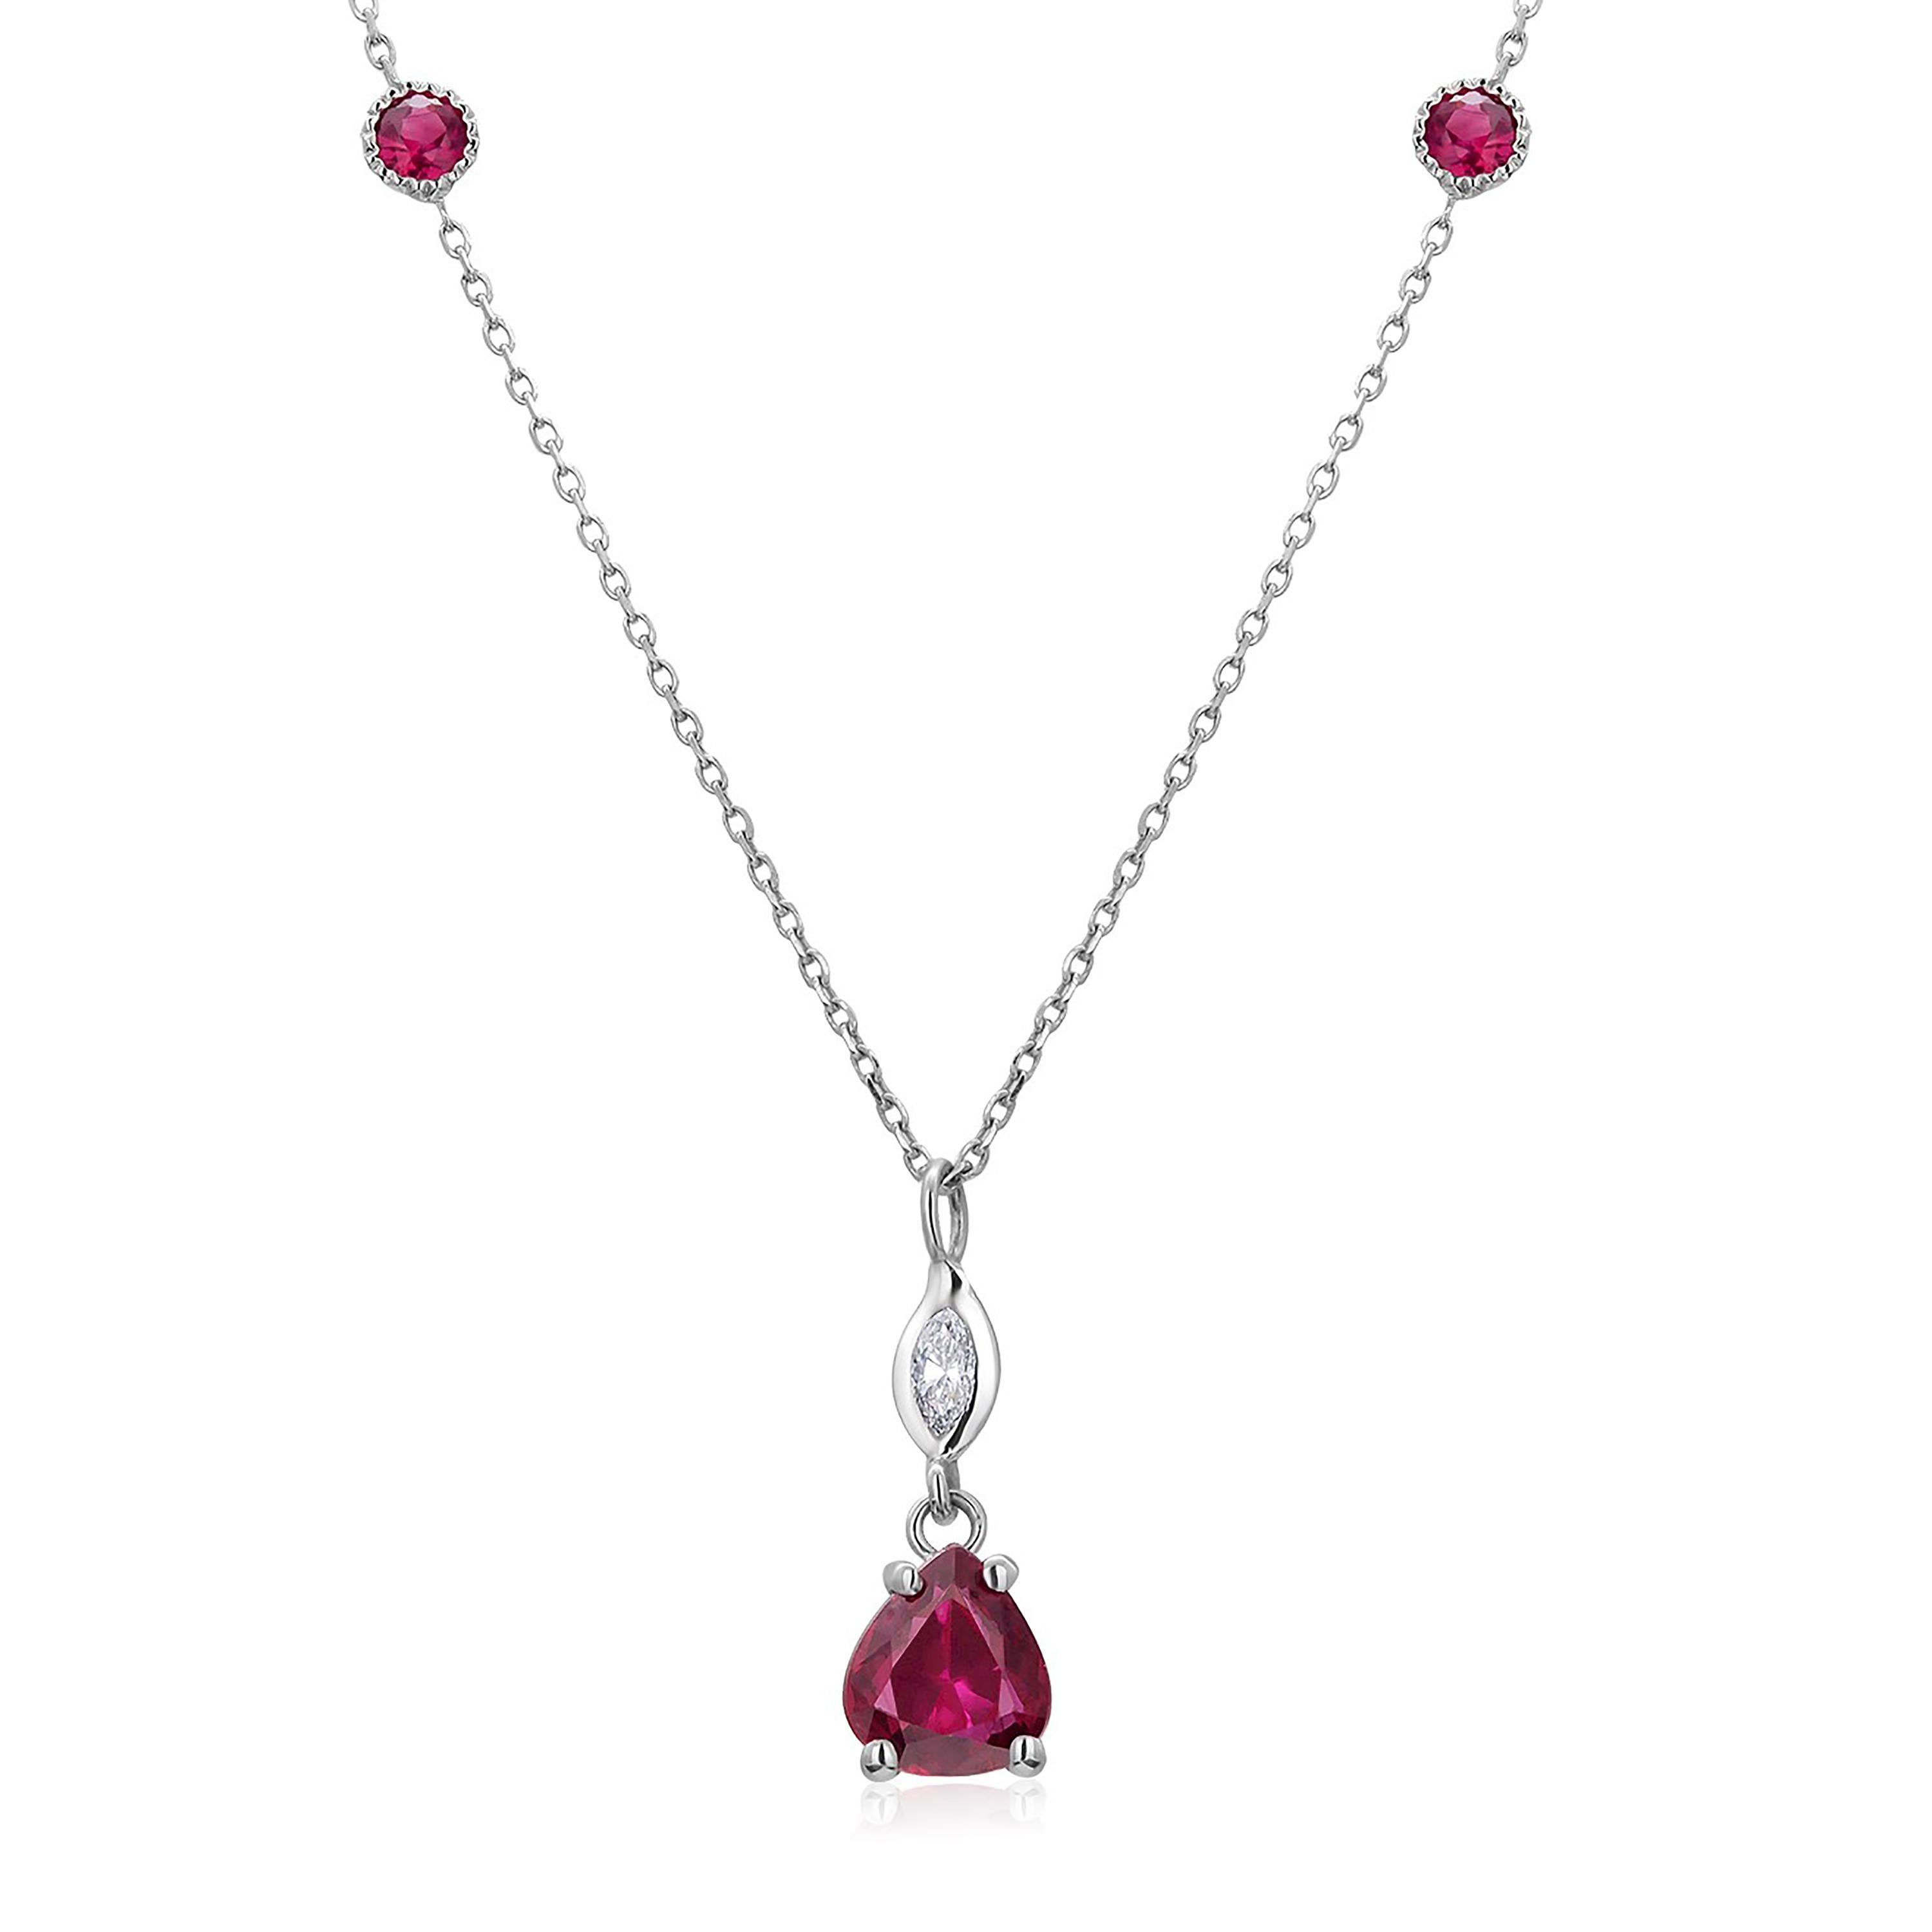 Fourteen karats white gold trending layered necklace pendant with hanging pear-shaped red ruby
One pear shape ruby weighing 0.93 carat
Two round-shaped ruby  weighing 0.30 carats bezel set with fine millgrain edge 
Marquise diamond weighing 0.10